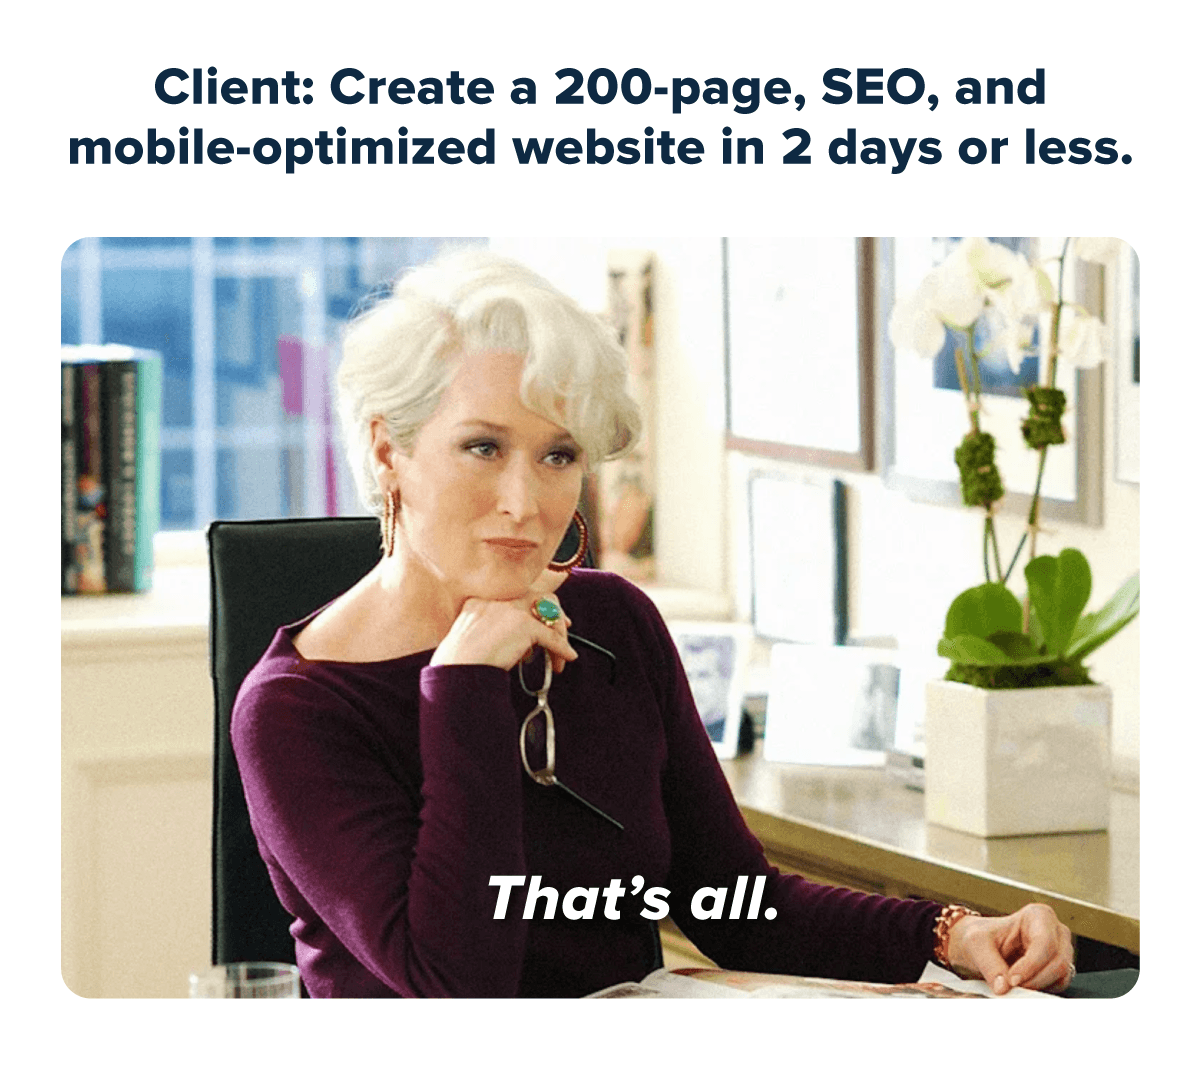 24 Marketing Memes That Will Have Your Agency ROFL - AgencyAnalytics